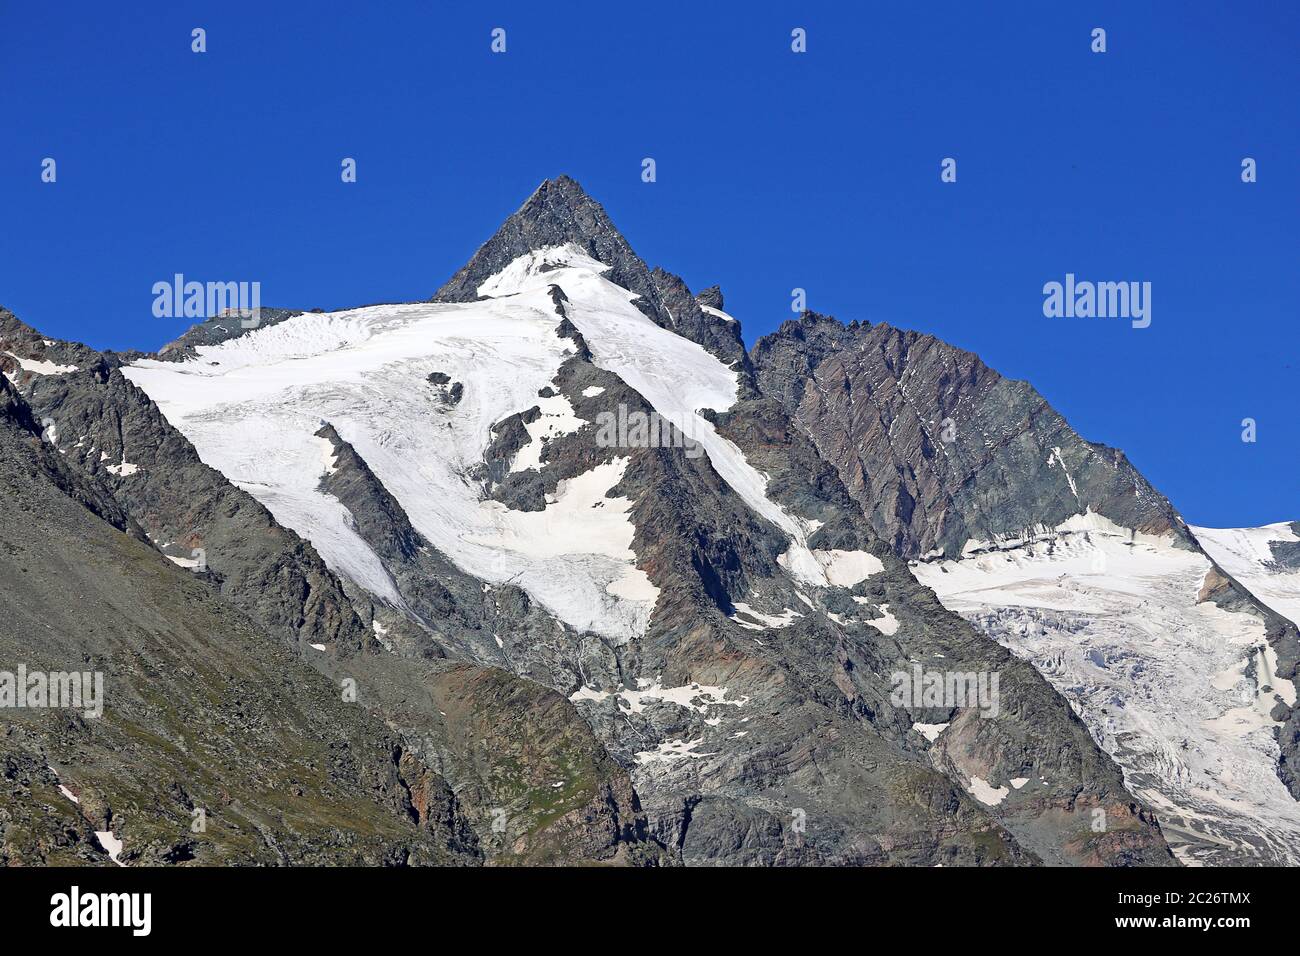 Grossglockner with 3798 m height the highest mountain in Austria Stock Photo